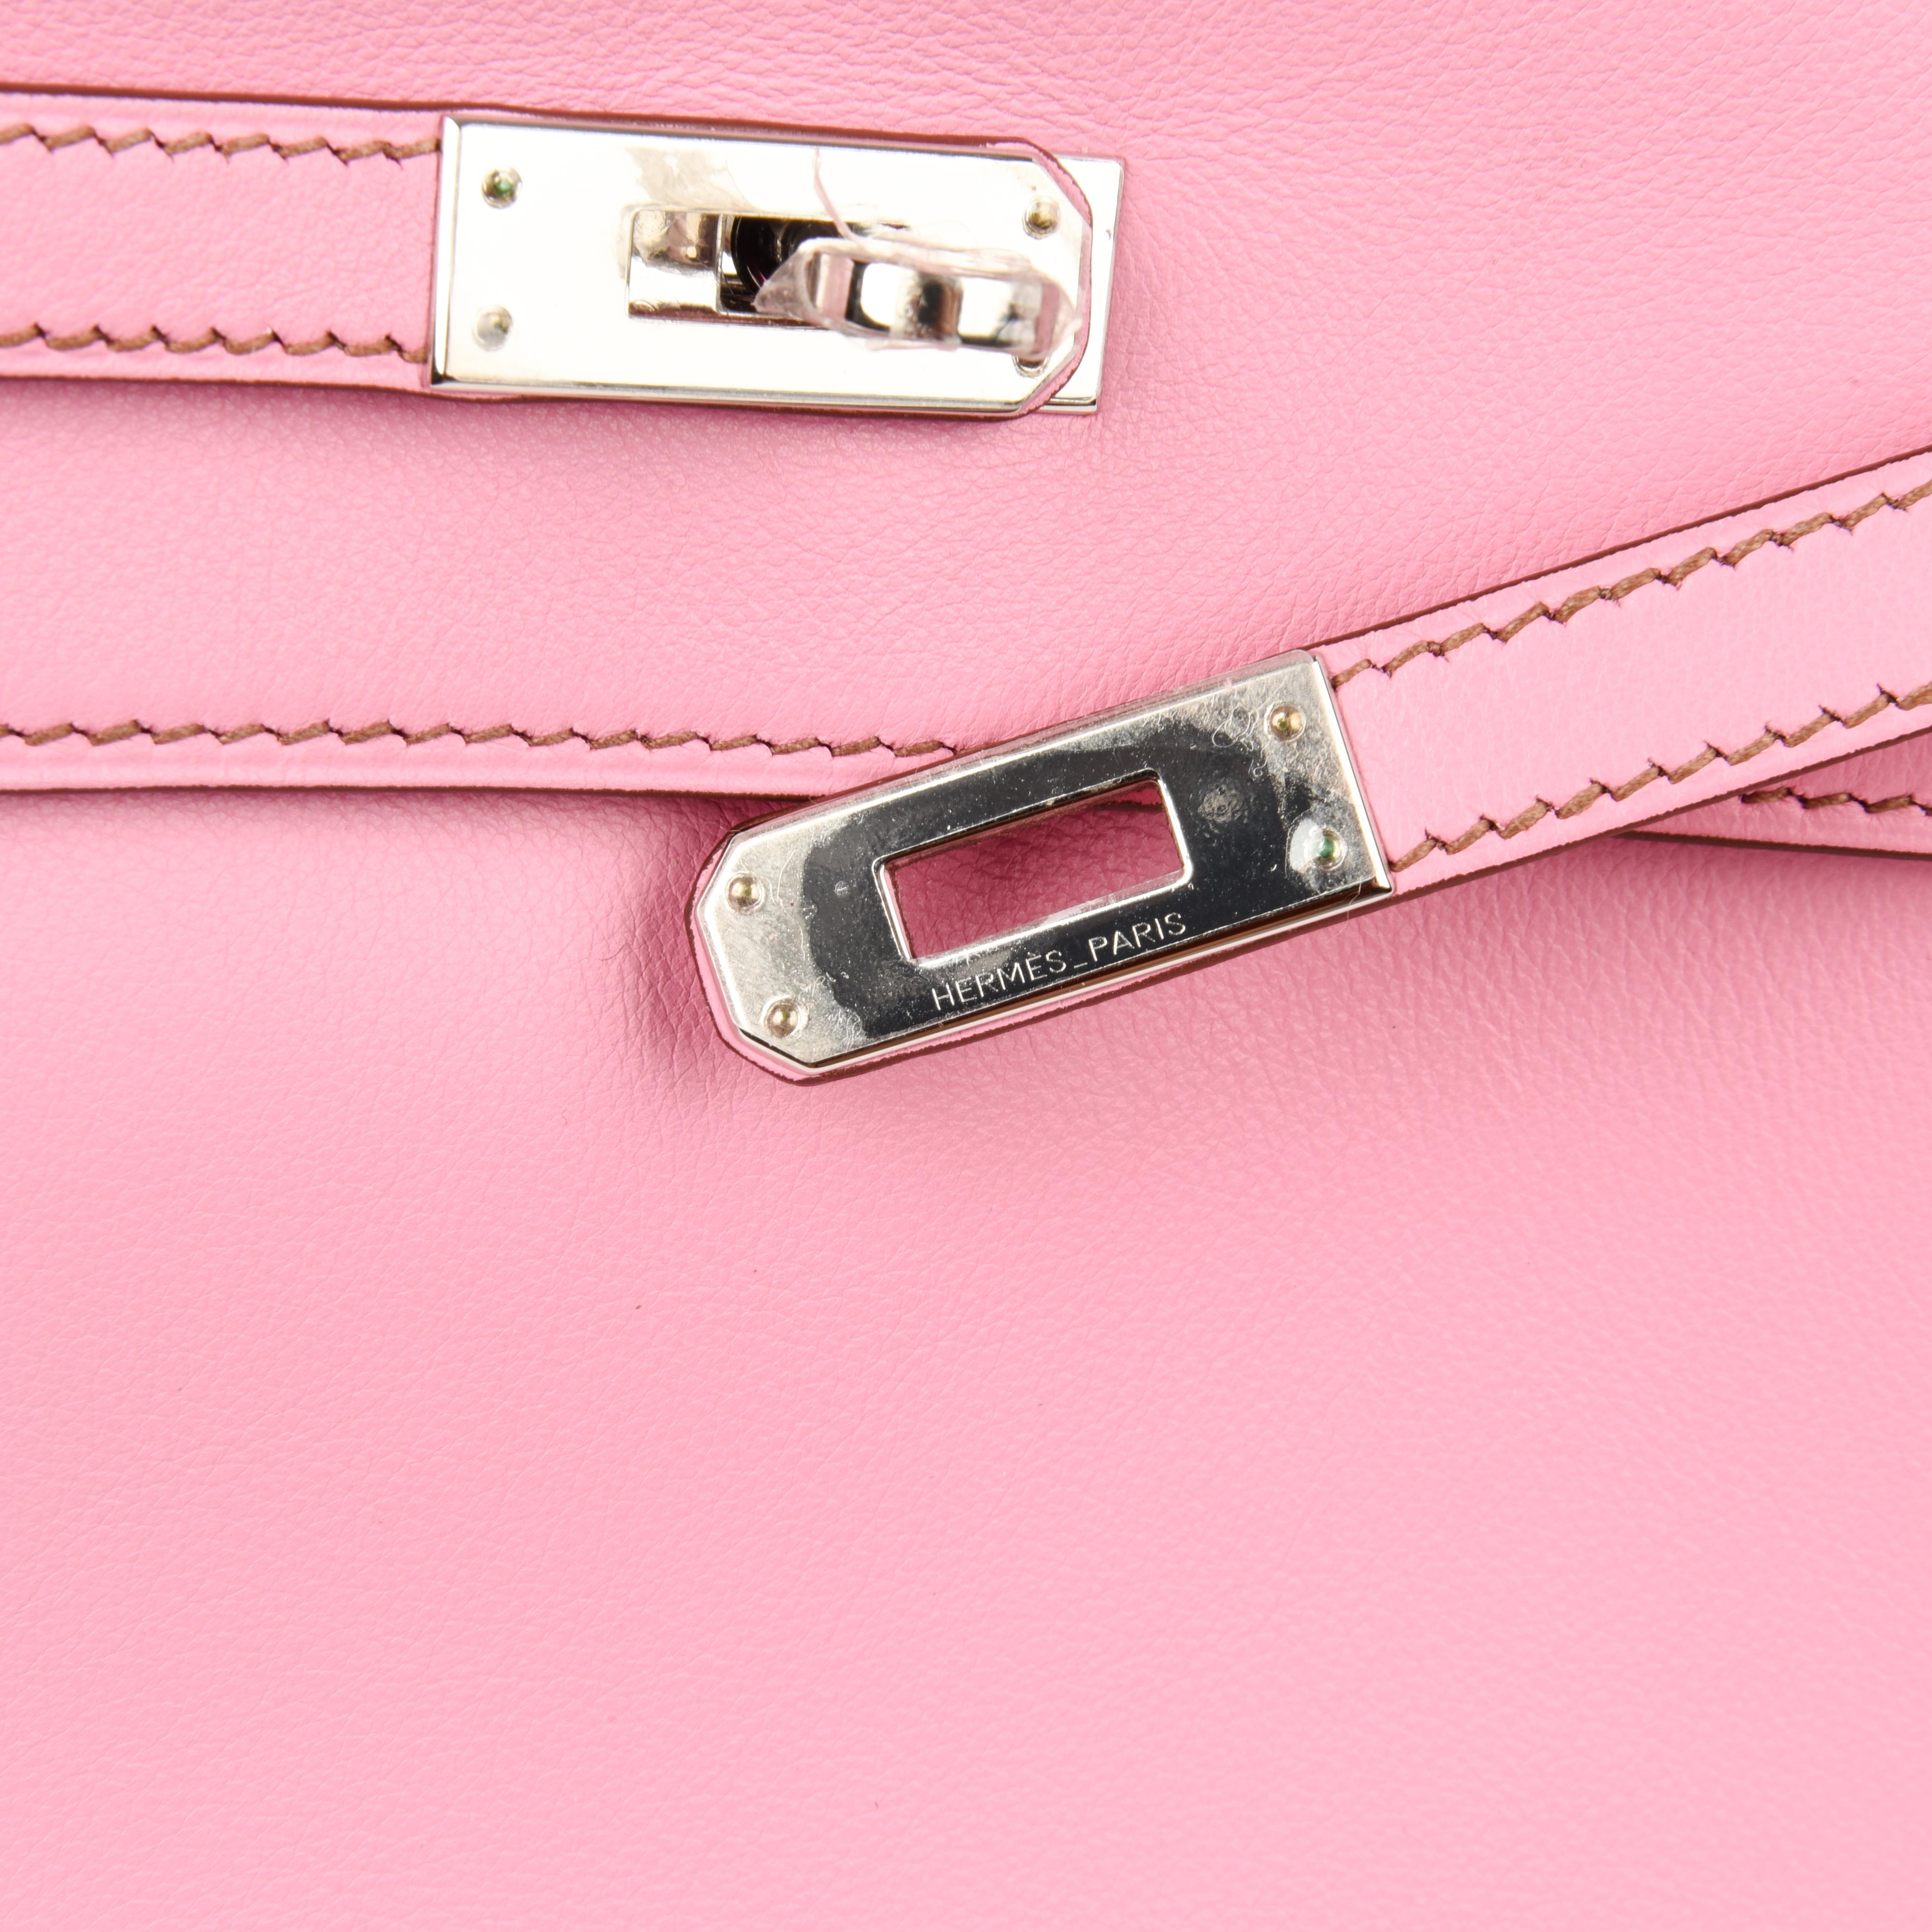 Guaranteed authentic Hermes Kelly Danse bag in exquisite 5P Pink Swift Leather.
A super versatile bag, it can be carried as a waist bag, cross body, shoulder bag, or without strap, as a clutch. 
Chic and fresh with Palladium hardware.   
Comes with